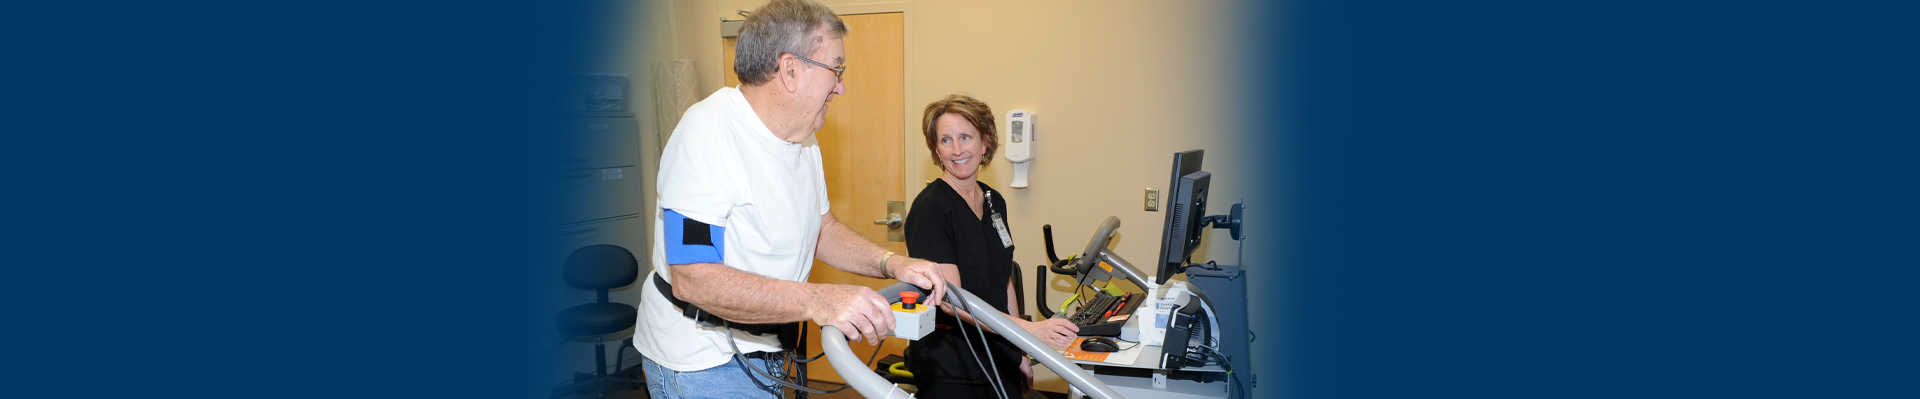 Banner picture of an elderly male patient standing up with wires hooked around his waist as he is doing Cardiac Rehab. There is a female Nurse standing next to him in front of a keyboard and computer monitor. She is smiling at the patient,